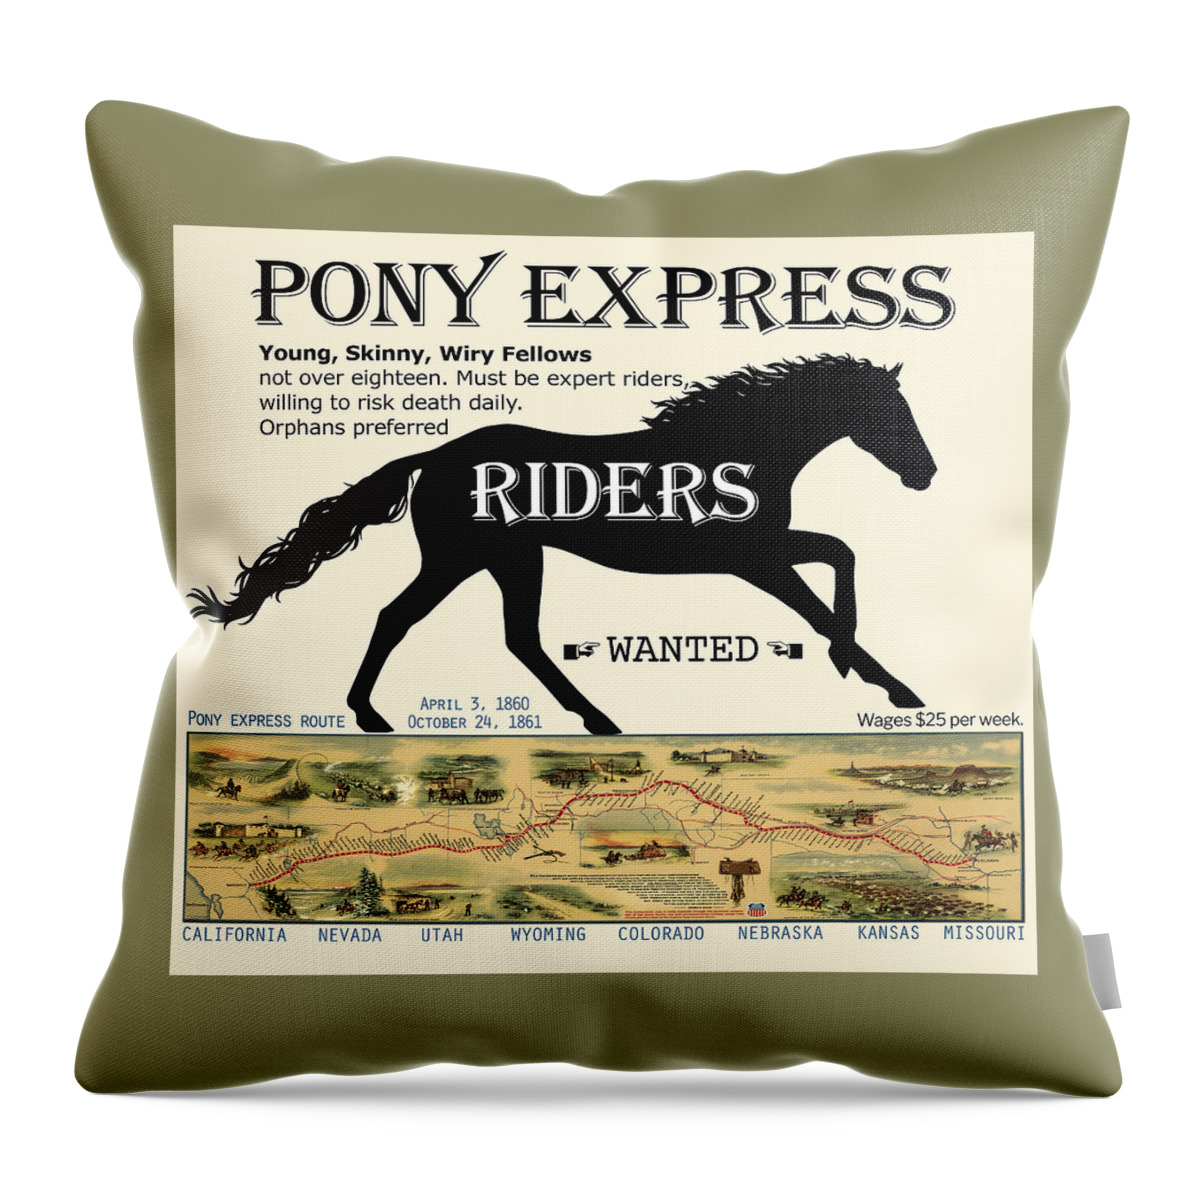 Pony Express Throw Pillow featuring the digital art Pony Express Want Ad by Lisa Redfern